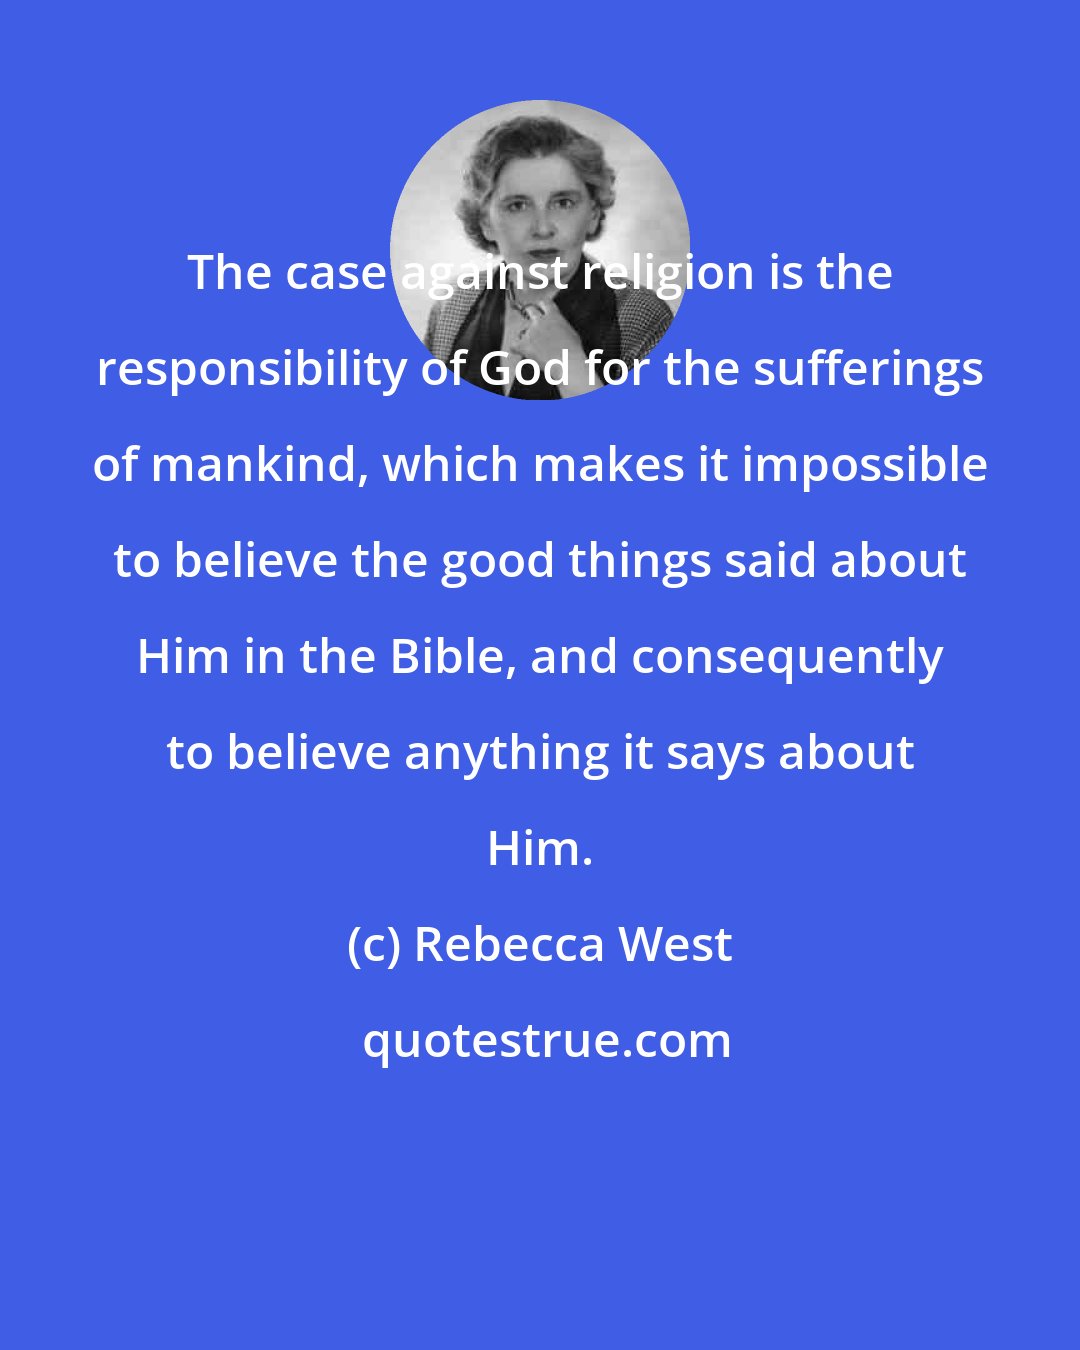 Rebecca West: The case against religion is the responsibility of God for the sufferings of mankind, which makes it impossible to believe the good things said about Him in the Bible, and consequently to believe anything it says about Him.